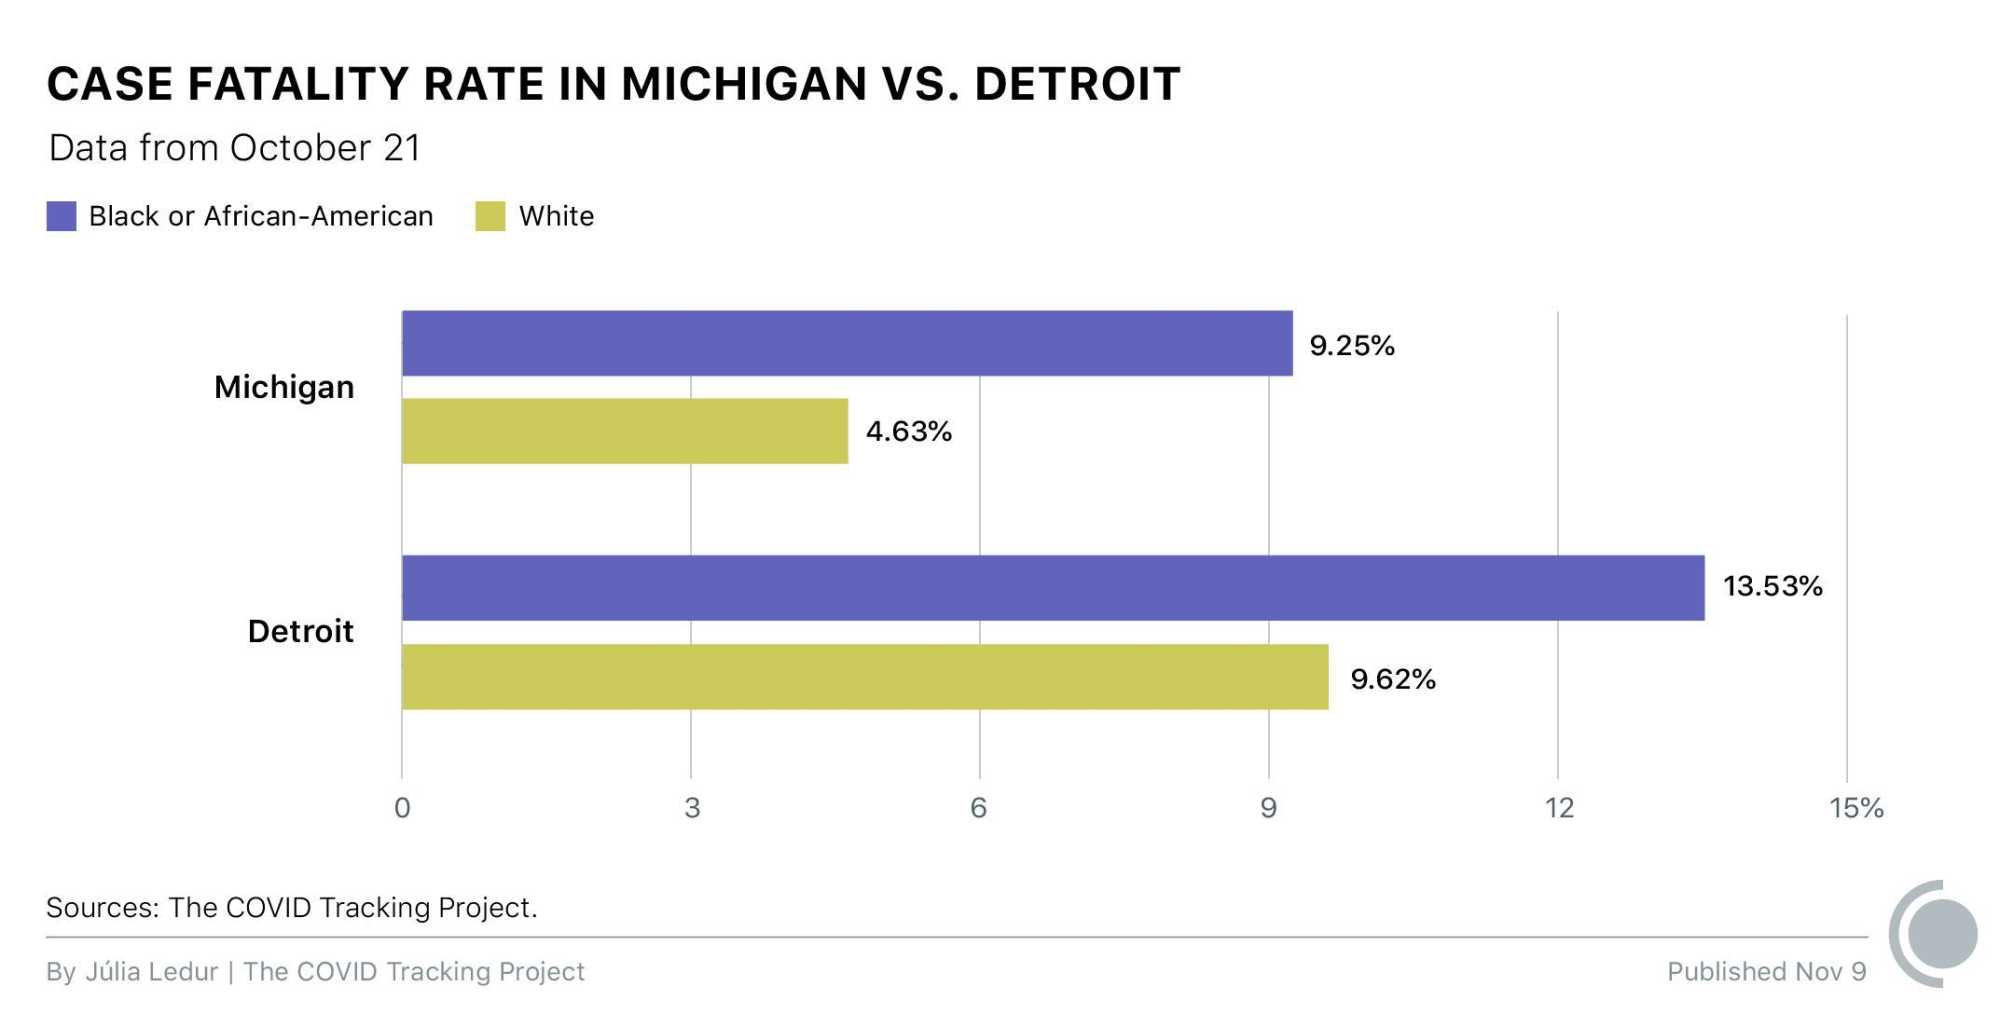 A double bar graph compares the case fatality rate of Black and African American people and White people in the state of Michigan and also for just the city of Detroit. In the state of Michigan, the case fatality rate for Black people is over 9% but under 5% for White people. In the city of Detroit, the case fatality rate for Black and African American people is 13.53% and 9.62% for White people. All data is as of October 21.